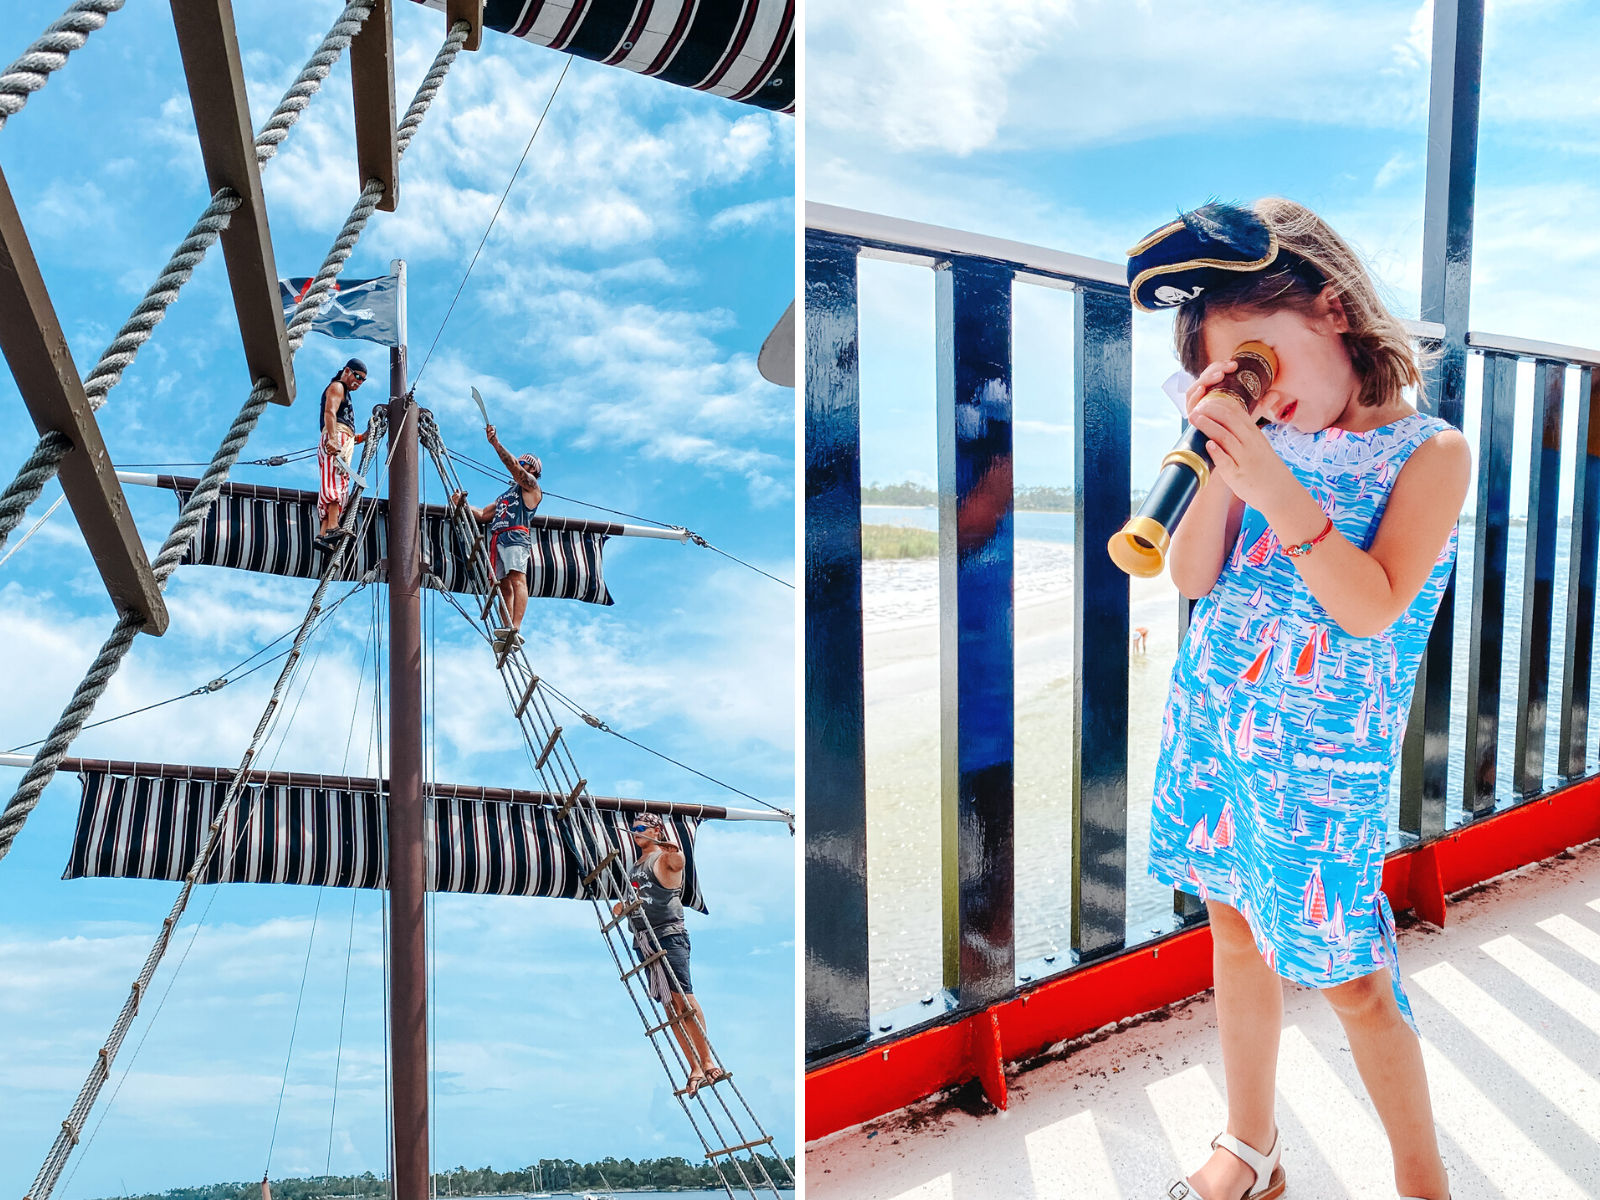 Panama City Beach Attractions by popular Memphis travel blog, Lone Star Looking Glass: image of a young girl on the Sea Dragon ship. 